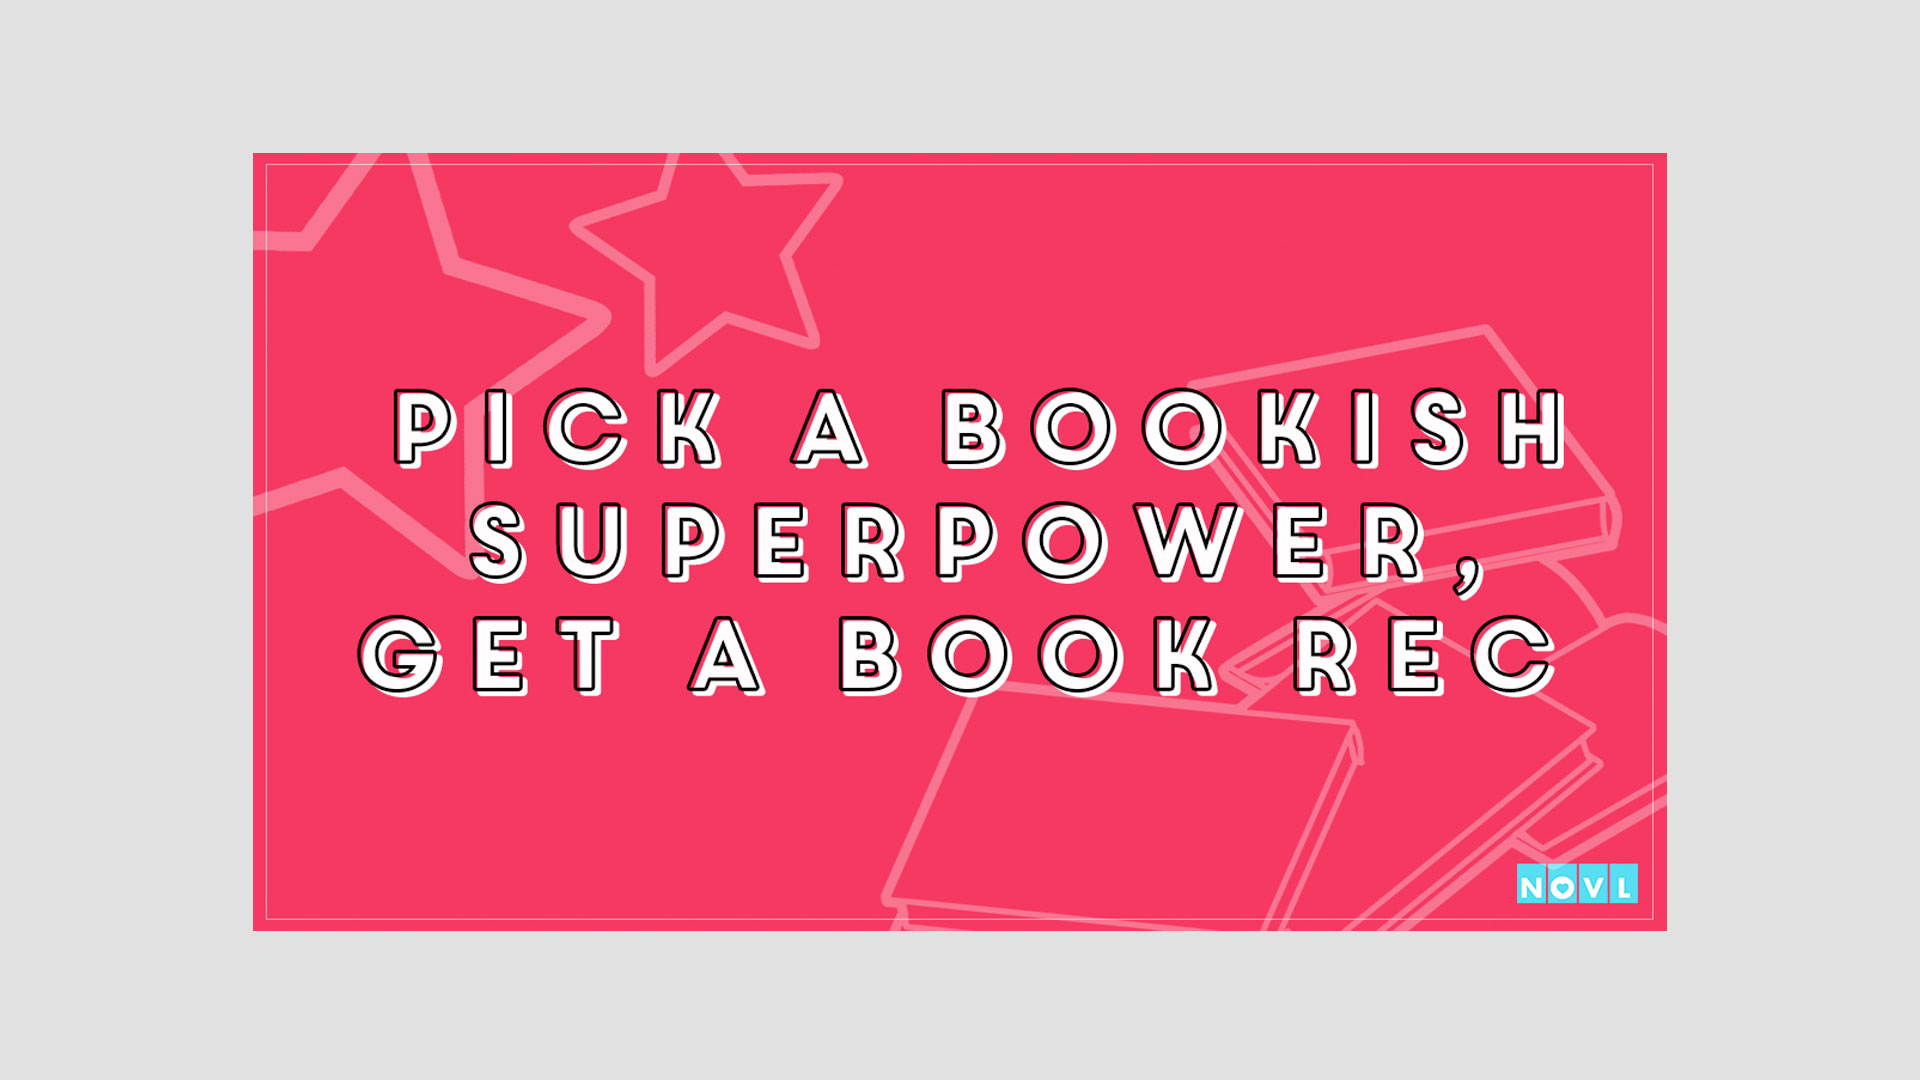 The NOVL Blog, Featured Image for Article: Pick a Bookish Superpower, Get a Book Rec!